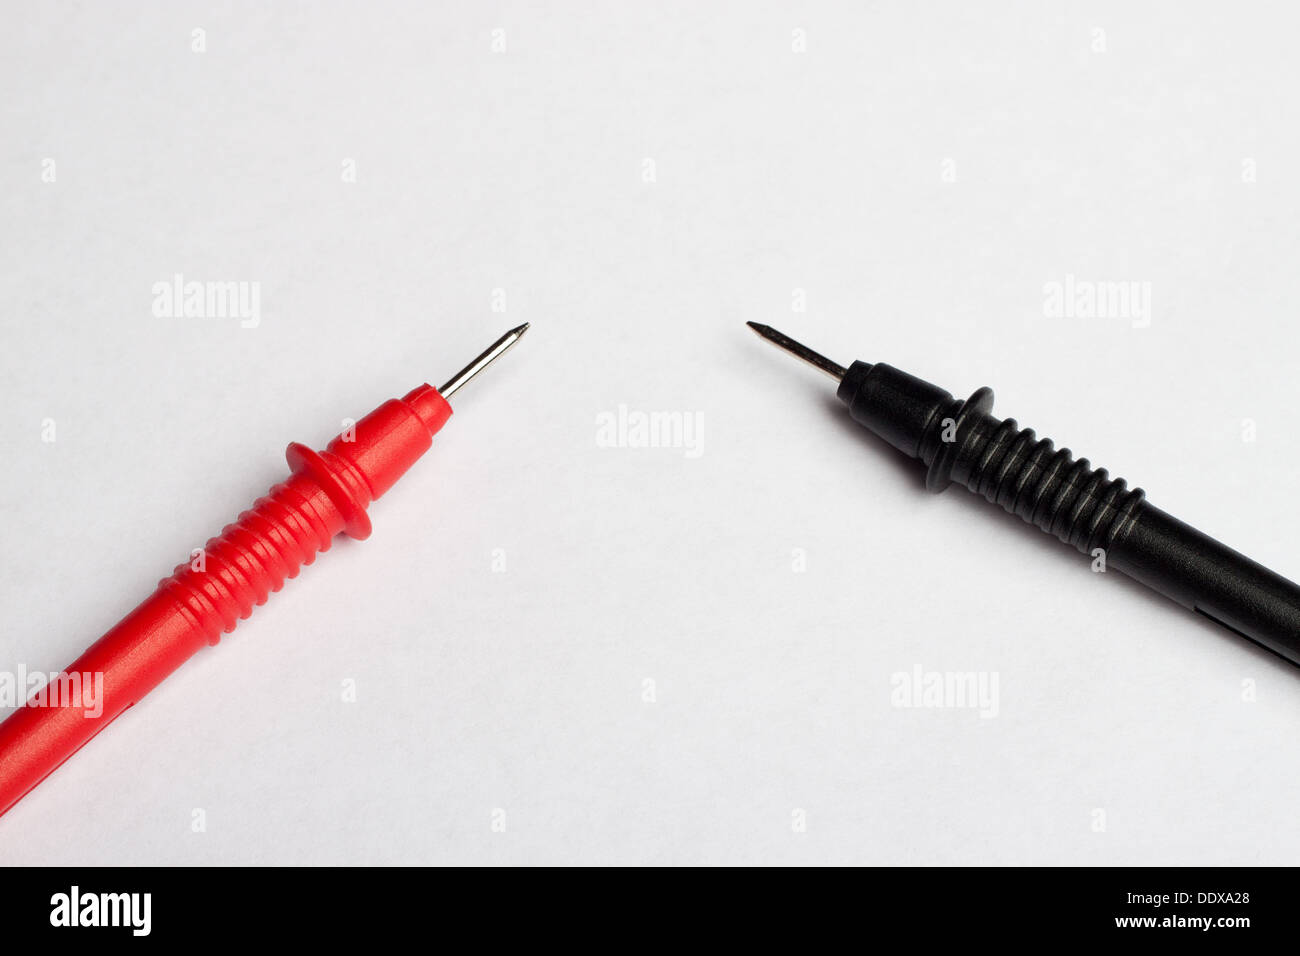 Positive and negative multimeter probes Stock Photo